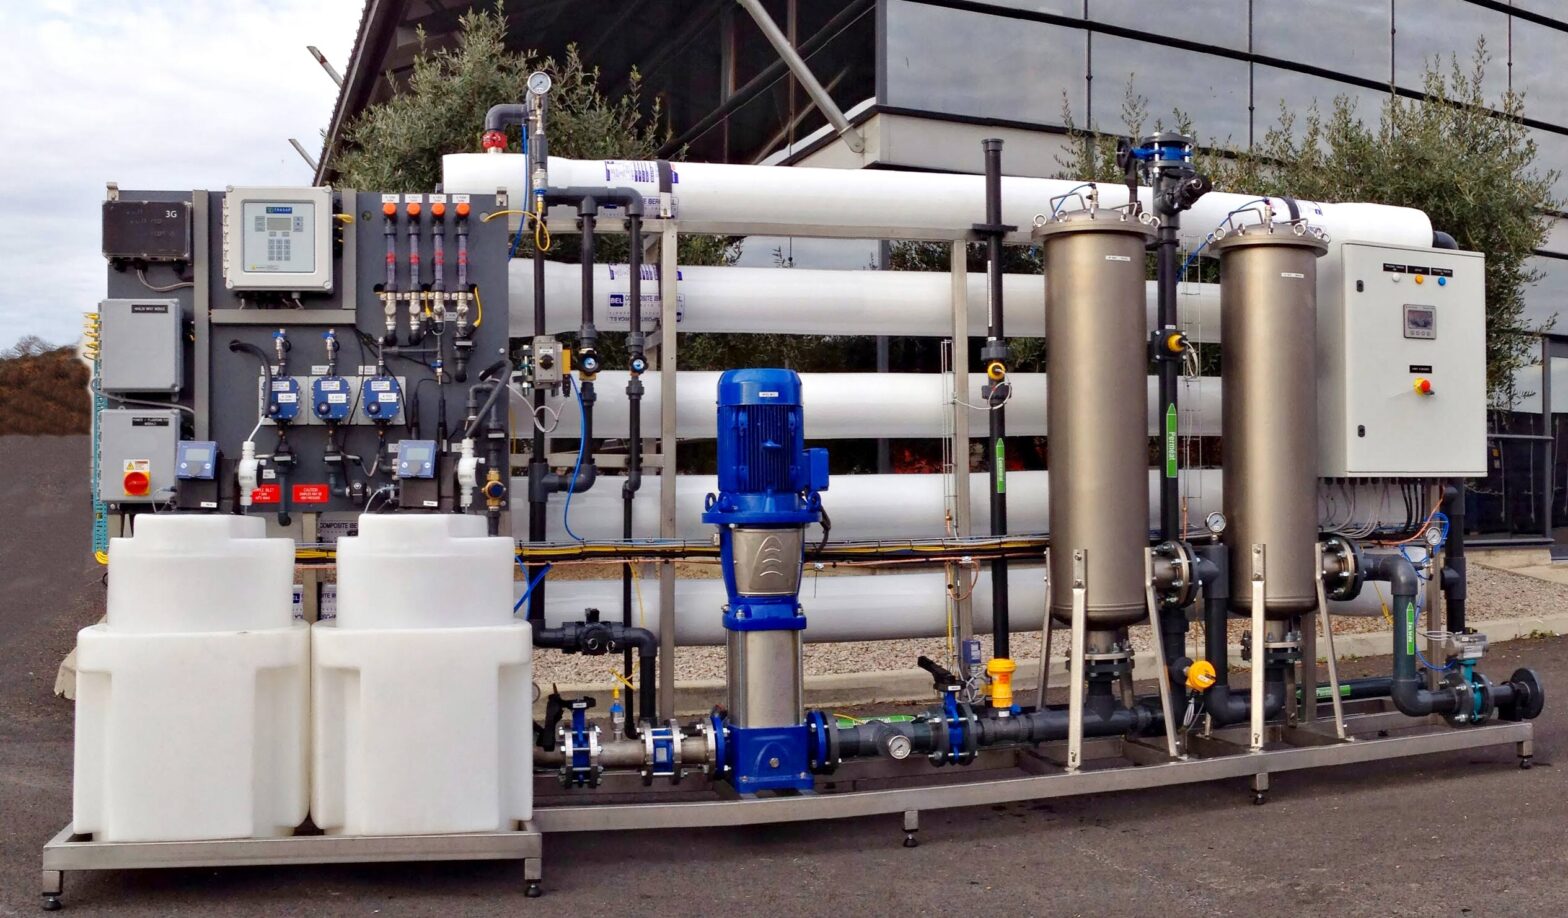 Residential Water Treatment Devices Market